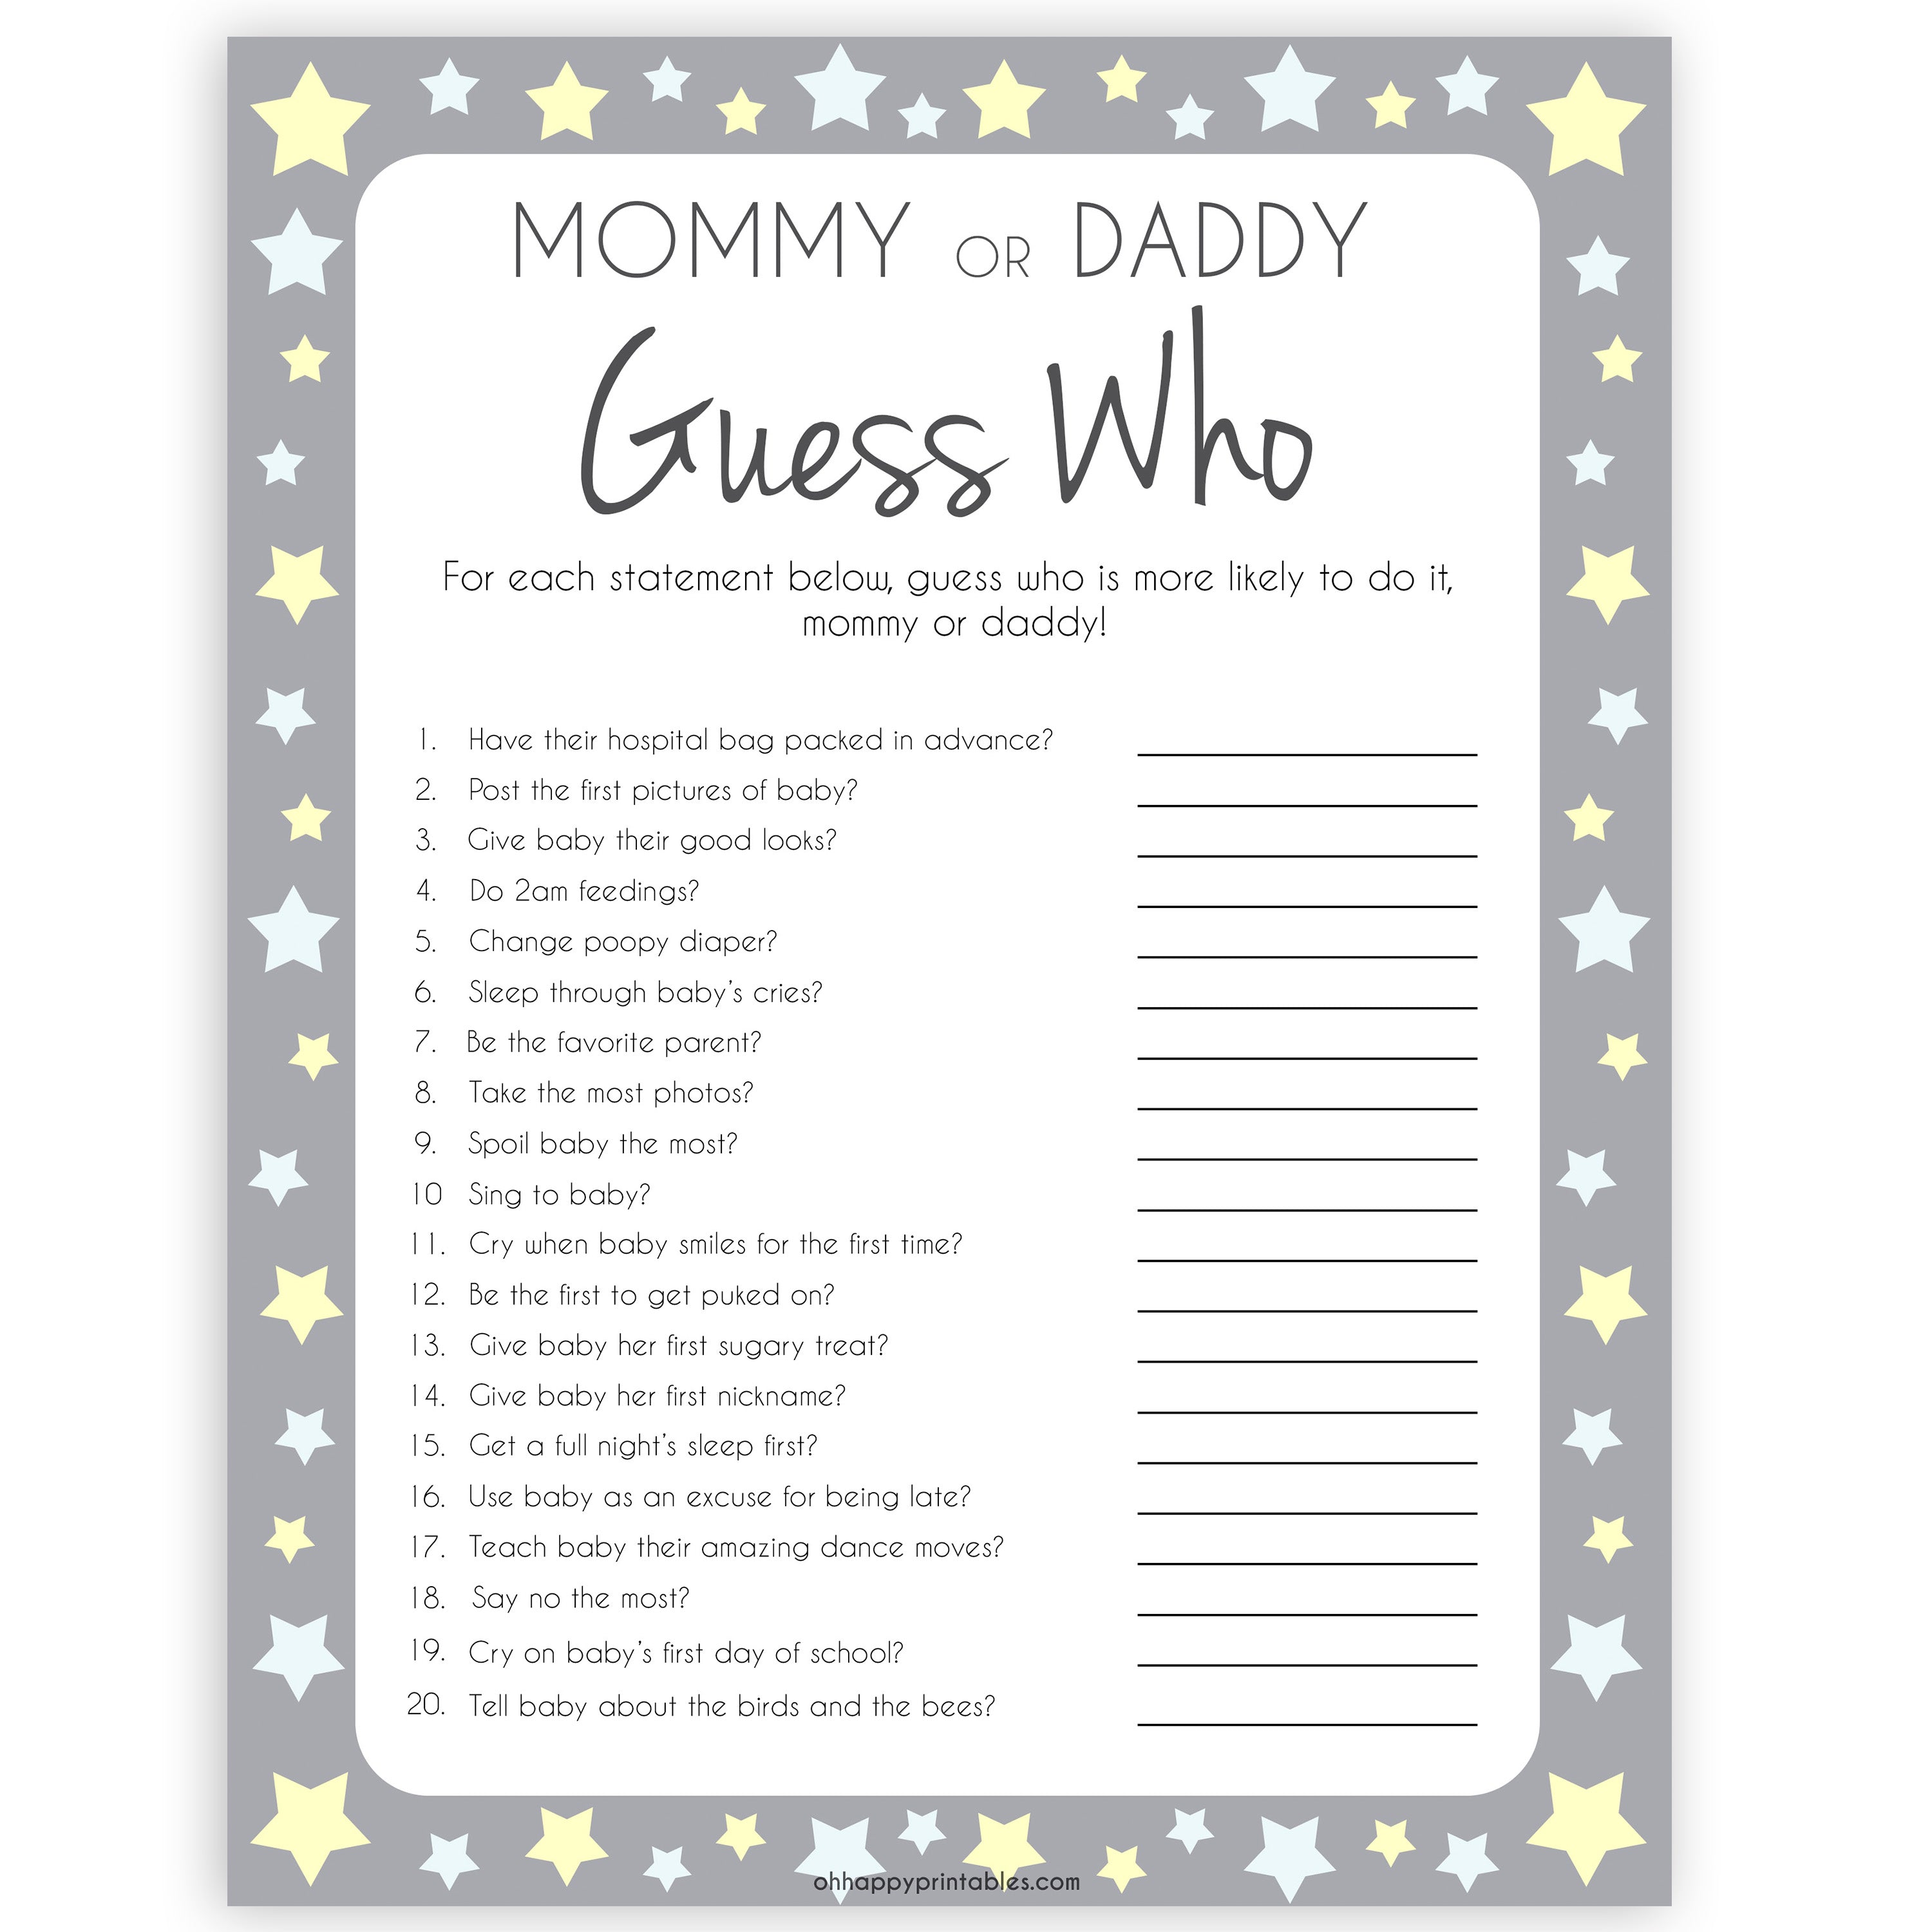 Mommy or Daddy Guess Who Baby Game, Printable Baby Shower Games, Grey Stars Baby Games, Guess Who Baby Game, Stars Mommy Daddy Guess Who, printable baby shower games, fun baby shower games, popular baby shower games